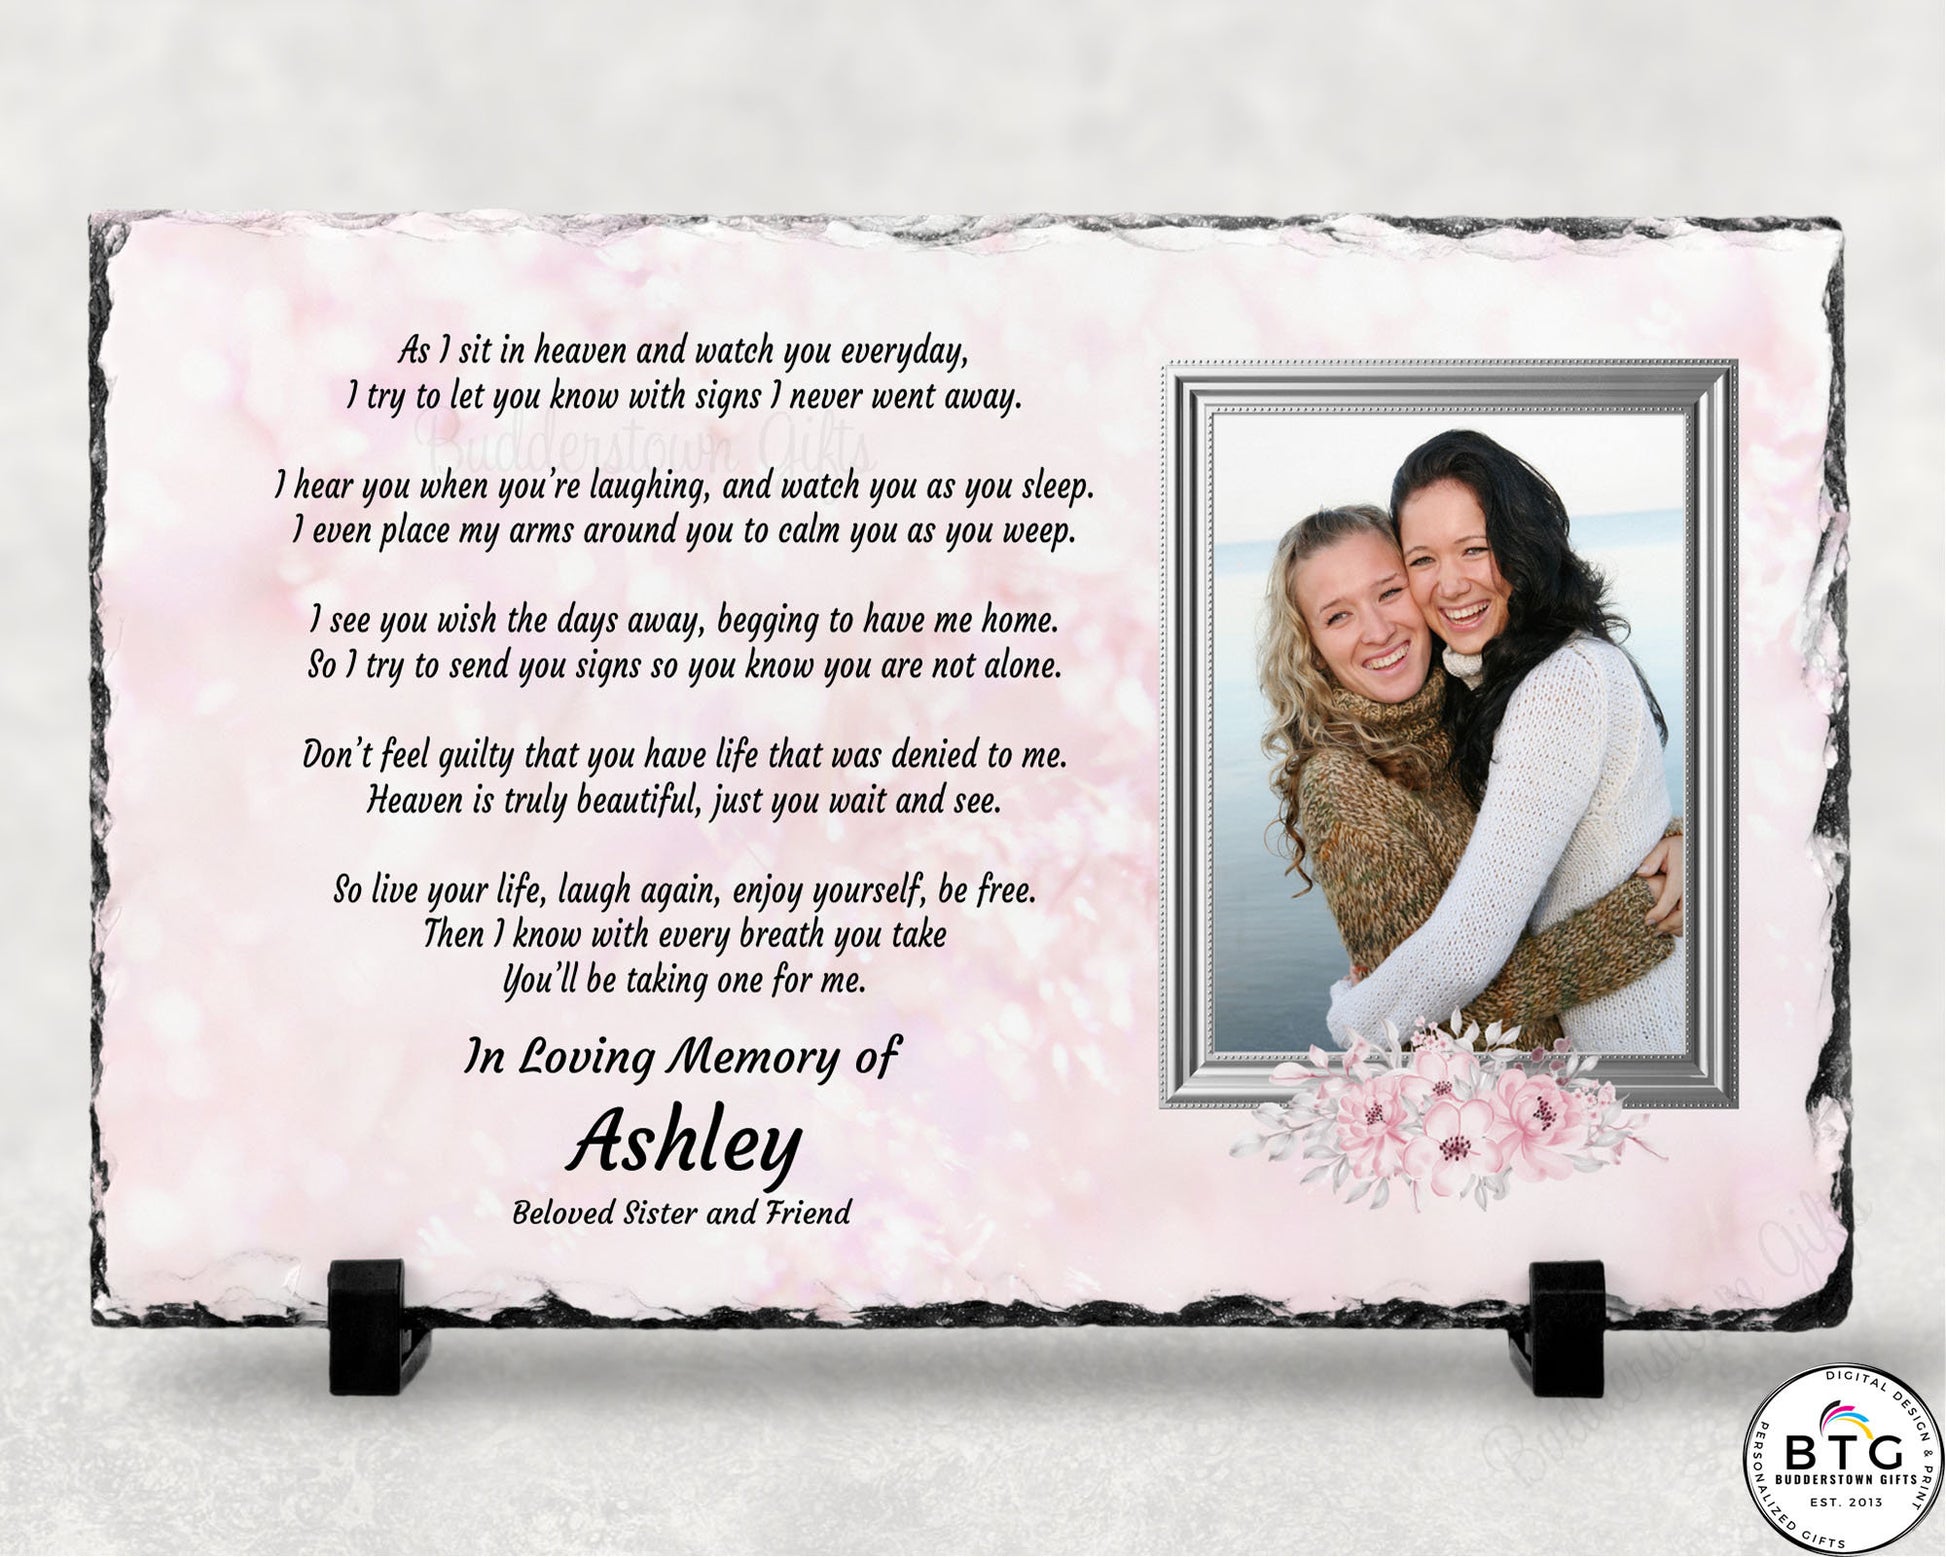  Photo Slate, adorned with a beautiful poem. This Memorial Slate serves as a thoughtful gesture for your grieving loved one, expressing your heartfelt care during this difficult time. 